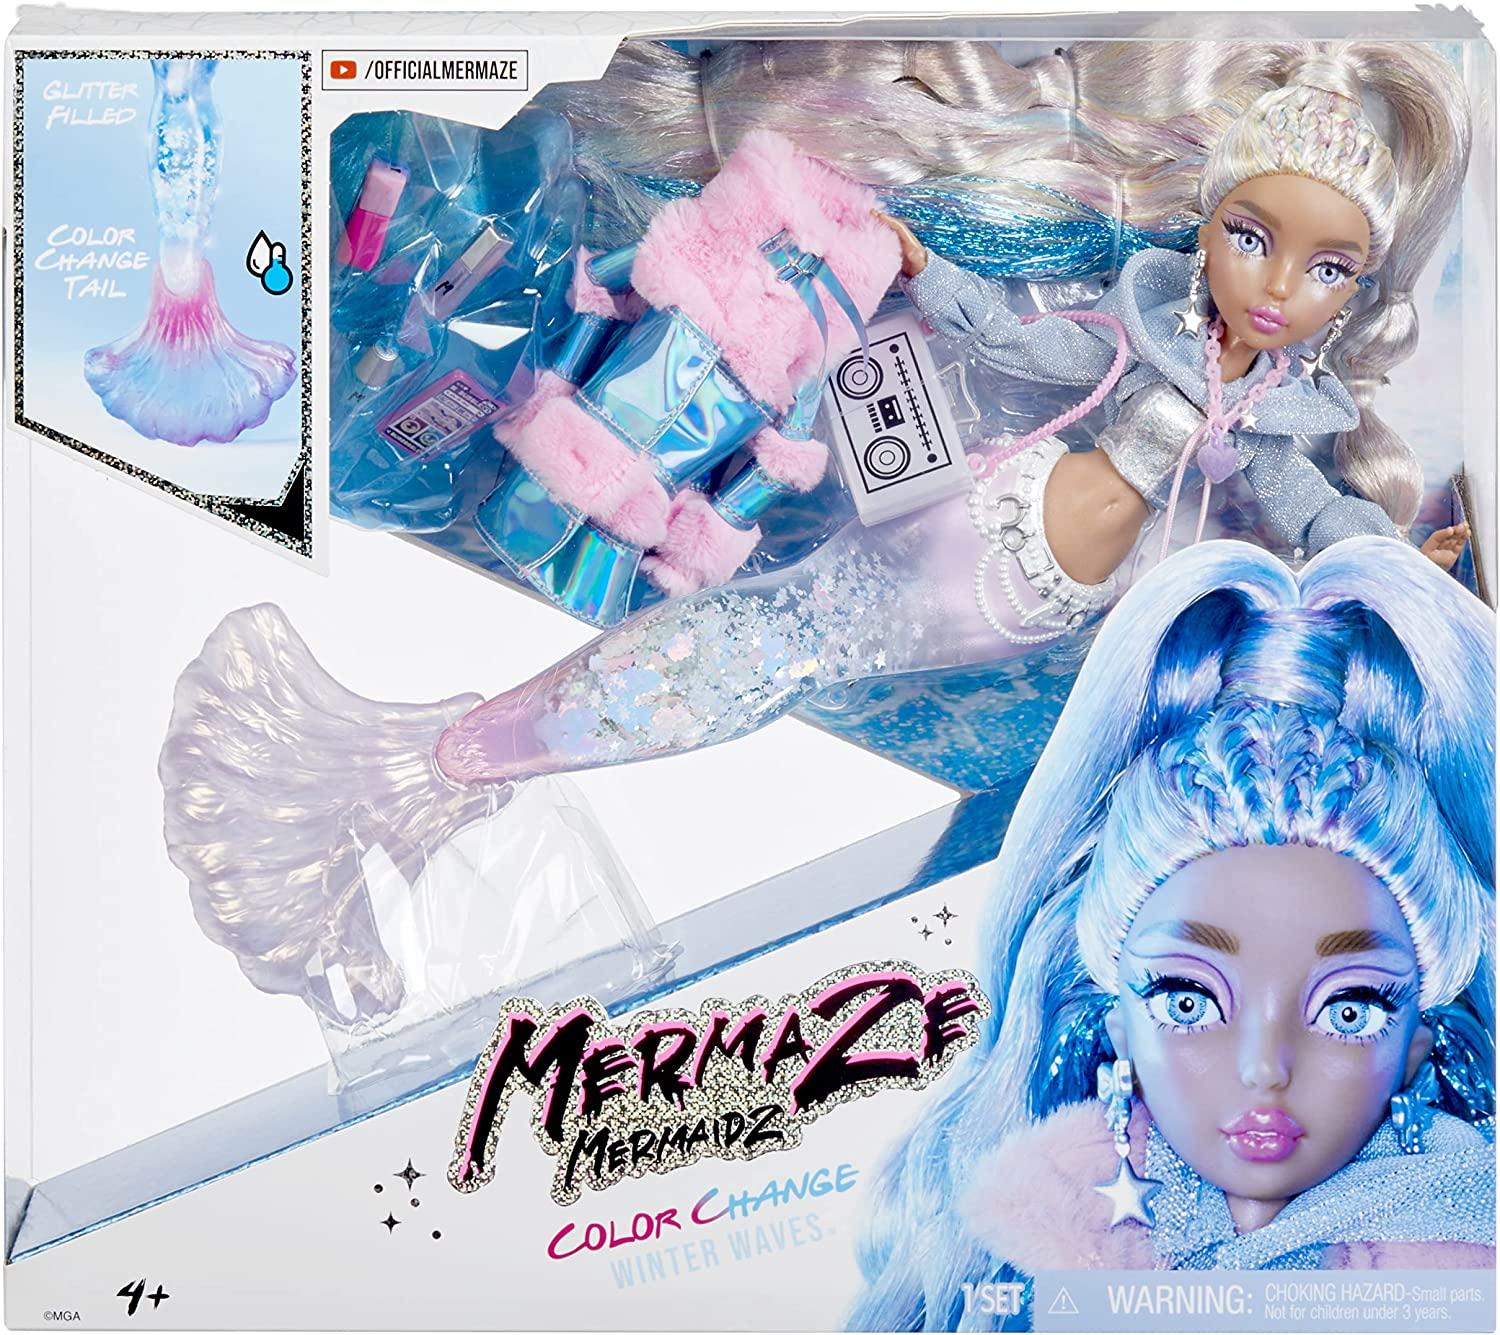 Mermaze Mermaidz™ Winter Waves Kishiko™ Mermaid Fashion Doll with Color Change Fin, Glitter-Filled Tail and Accessories